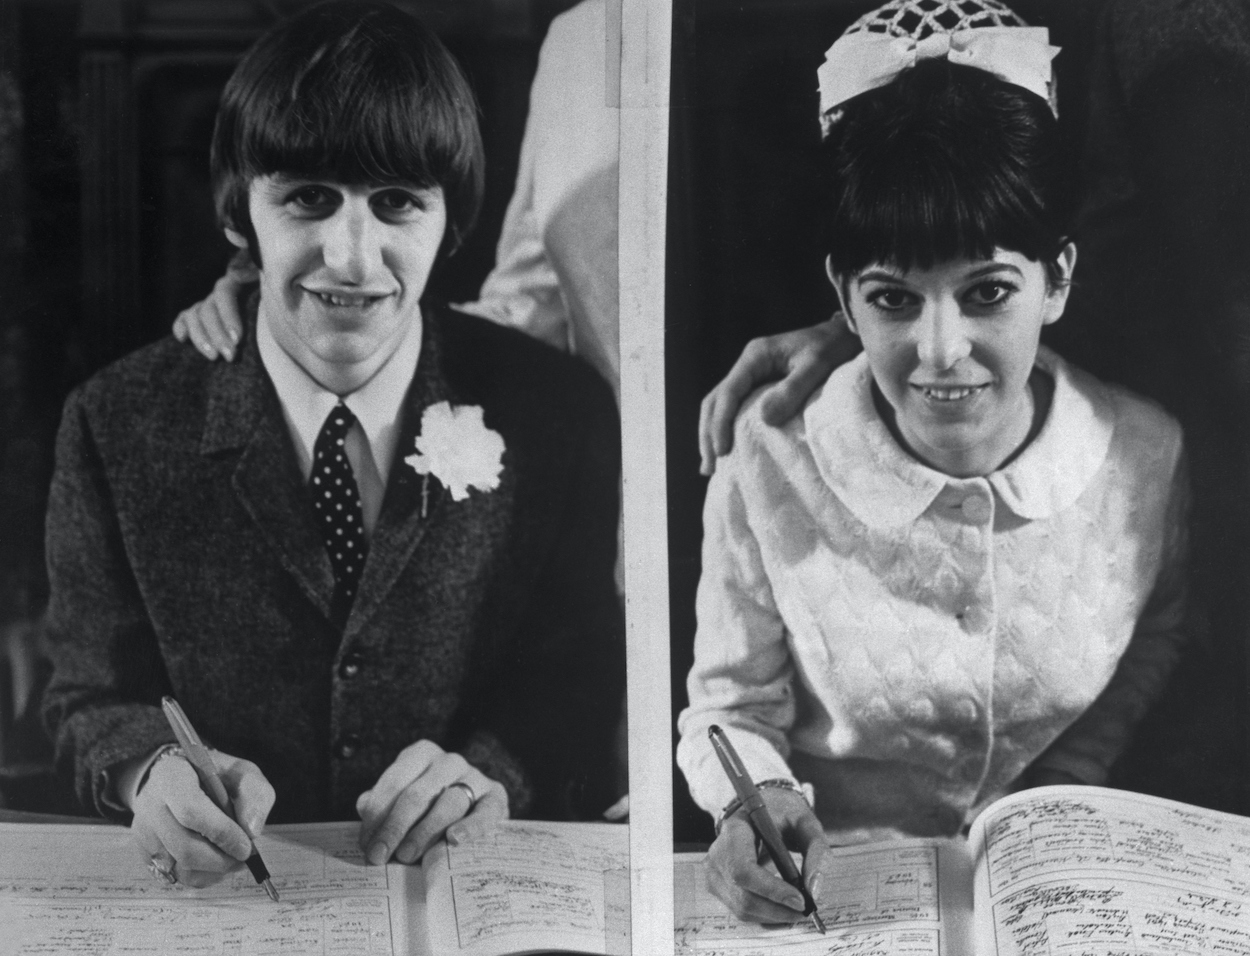 Beatles drummer Ringo Starr (left) and Maureen Cox add their names to the register at London's Caxton Hall after their wedding in 1965.